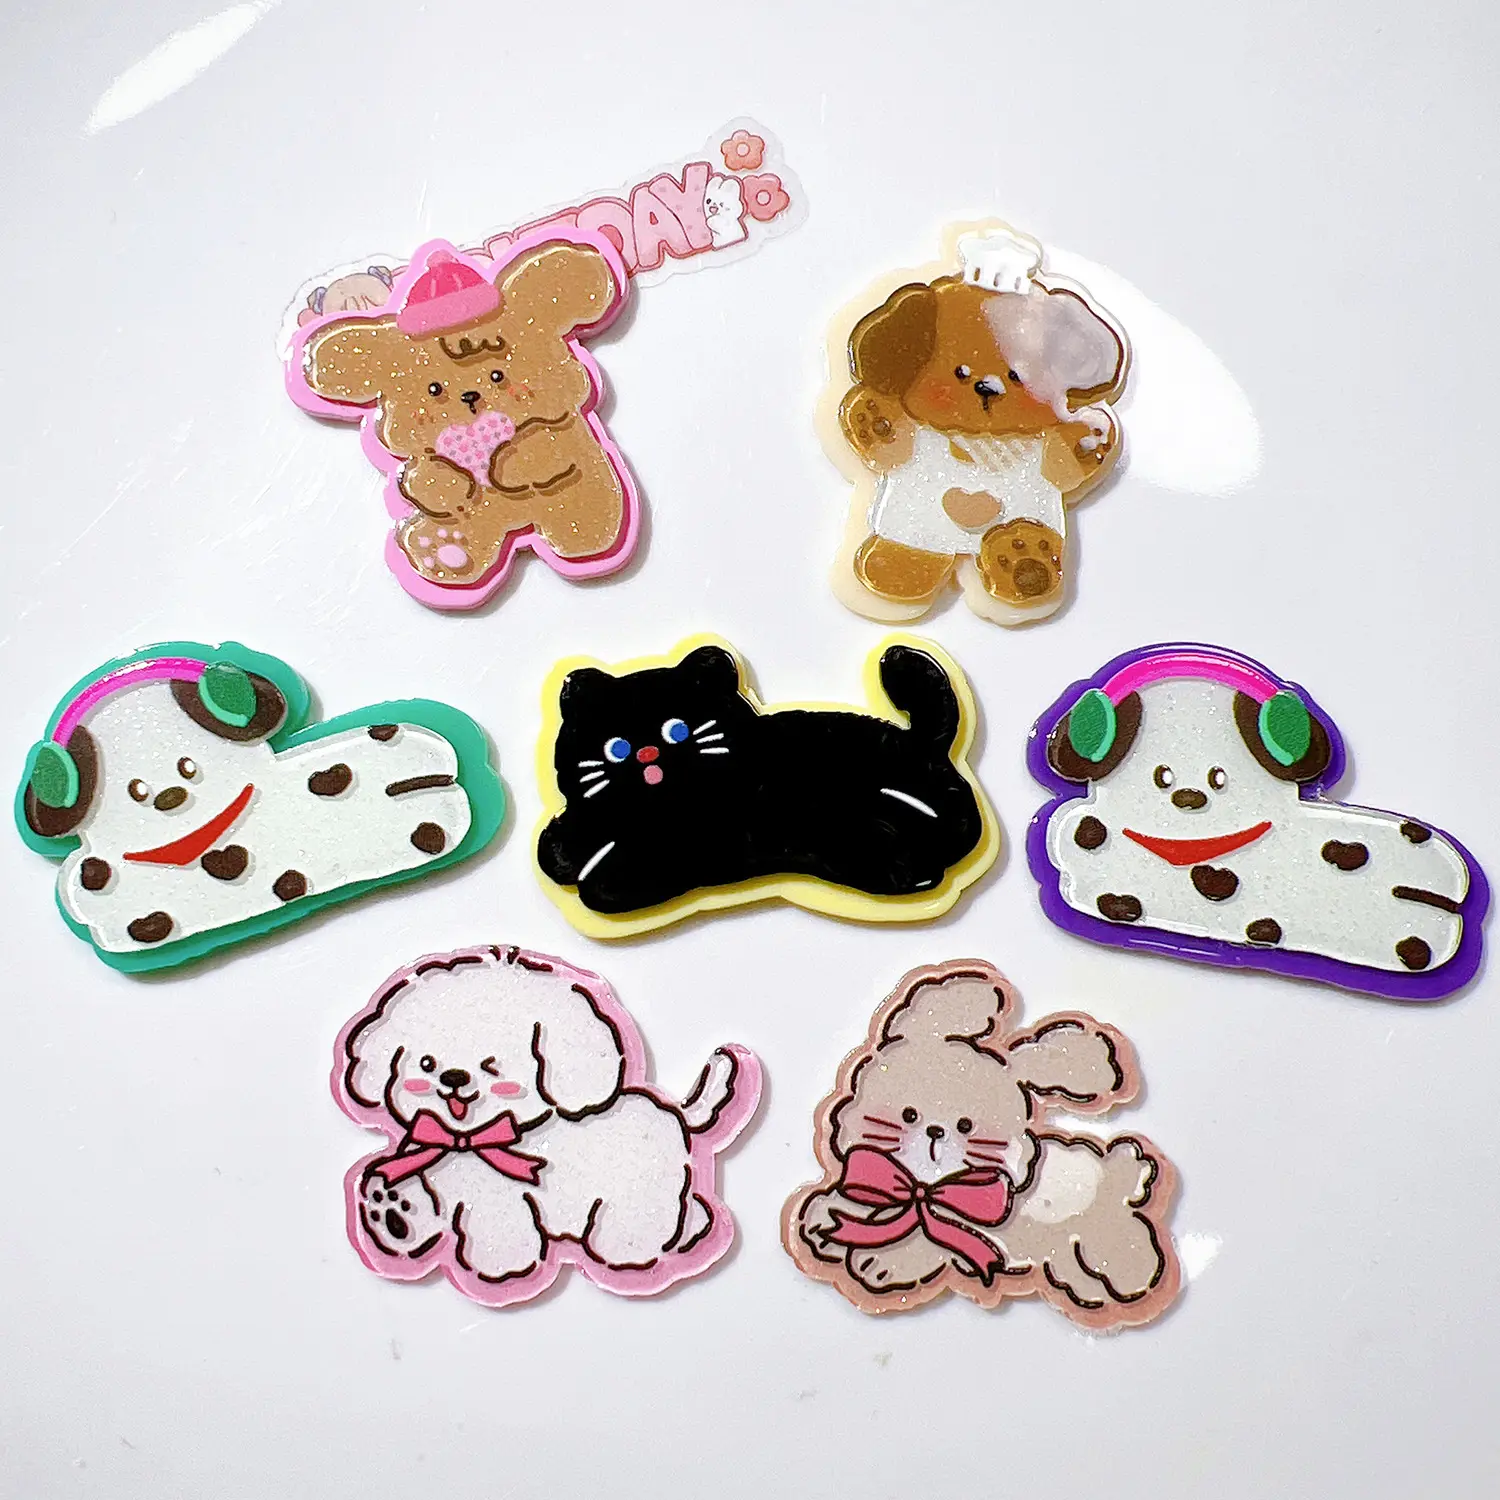 Hot Selling Cartoon Sparkling Glitter Cute Ear Dog Patch 3D Resin Charm Craft For Decoration Festival Accessories DIY